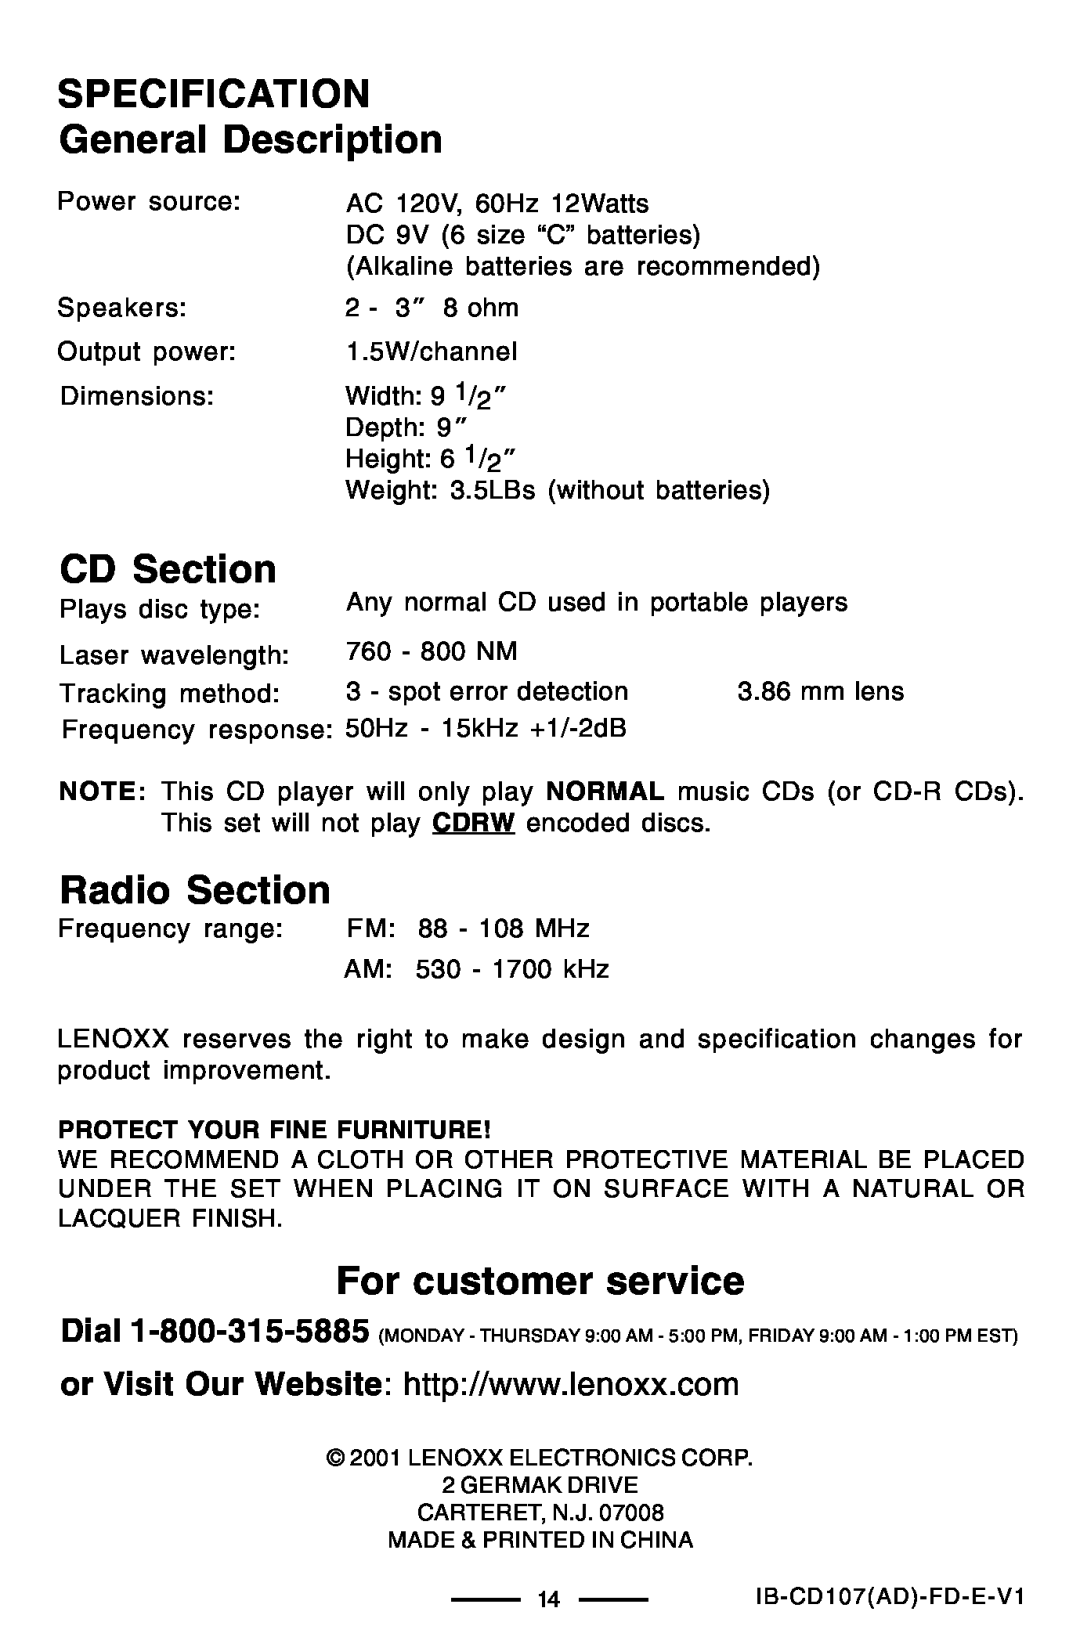 Lenoxx Electronics CD-107 manual SPECIFICATION General Description, CD Section, Radio Section, For customer service 